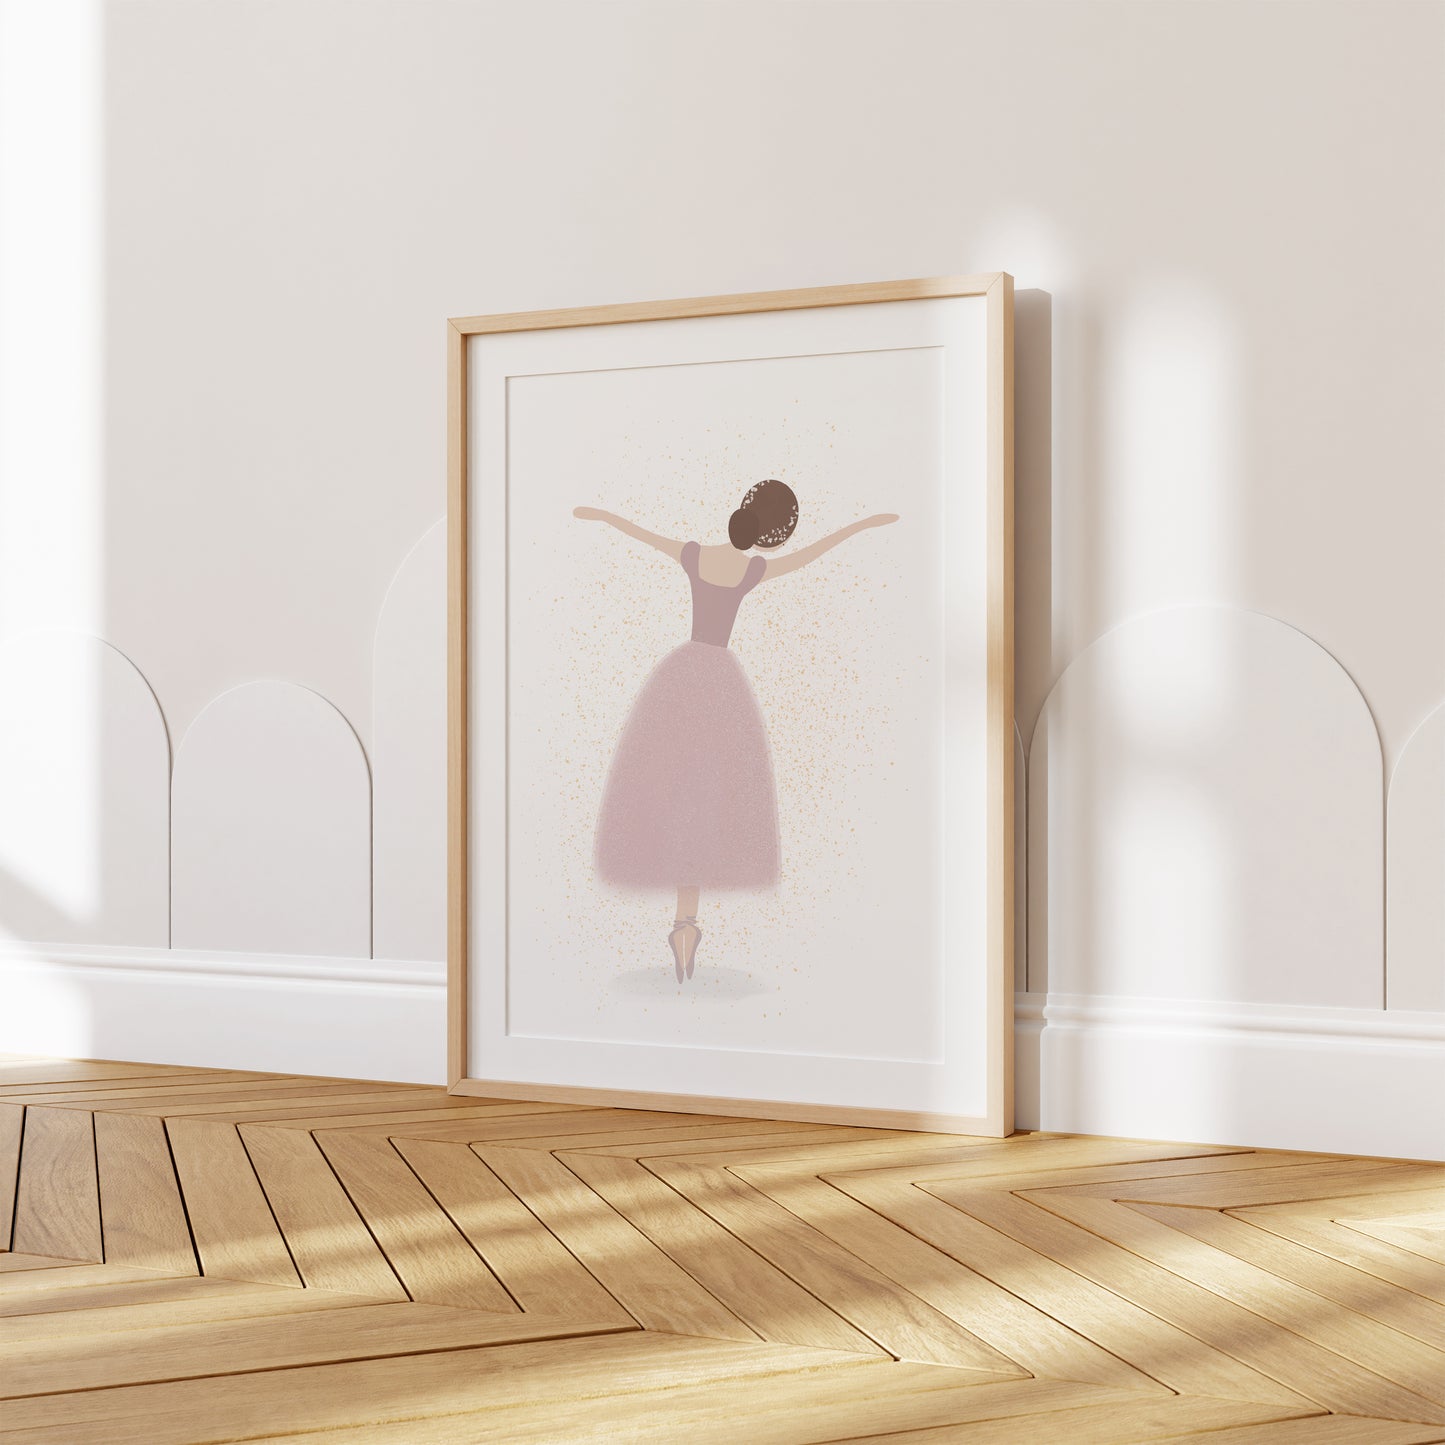 Ballerina Allegra Art Print featuring a ballerina fromt he back in pink dress with sparkles